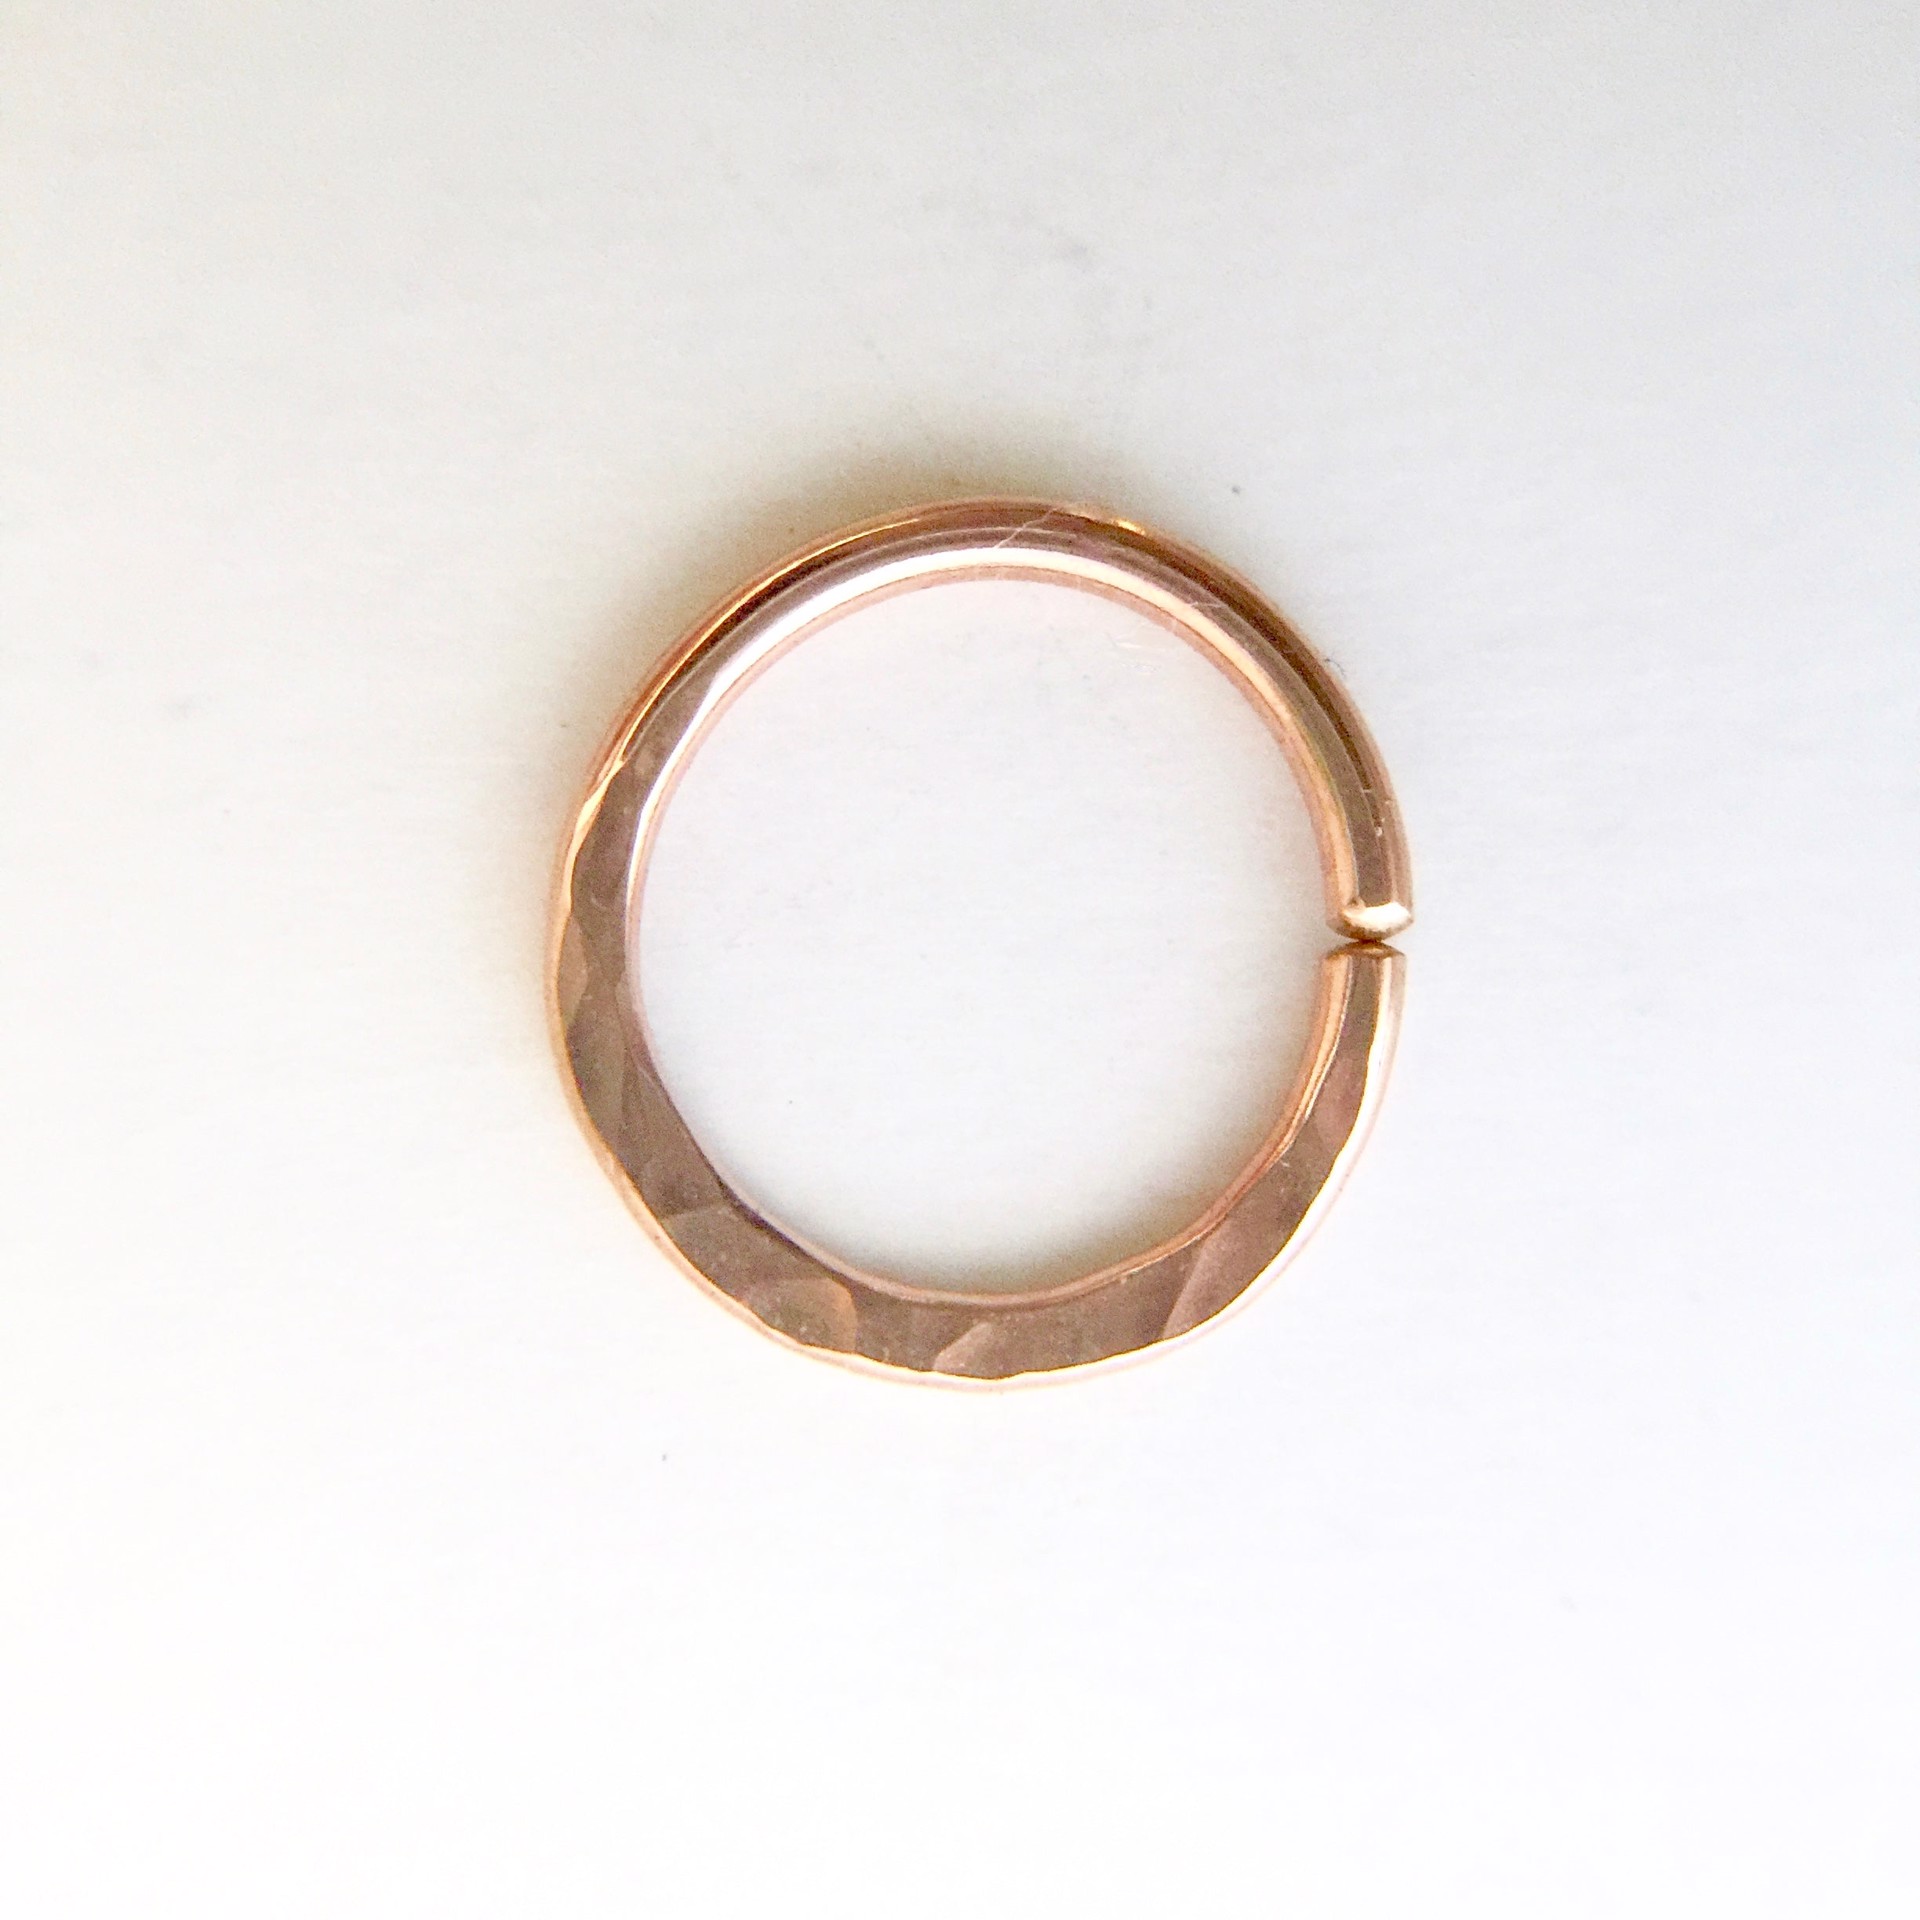 Hammered Texture Nose/Septum Ring- Rose Gold Filled - 6mm / 20 by Clementine & Co. Jewelry